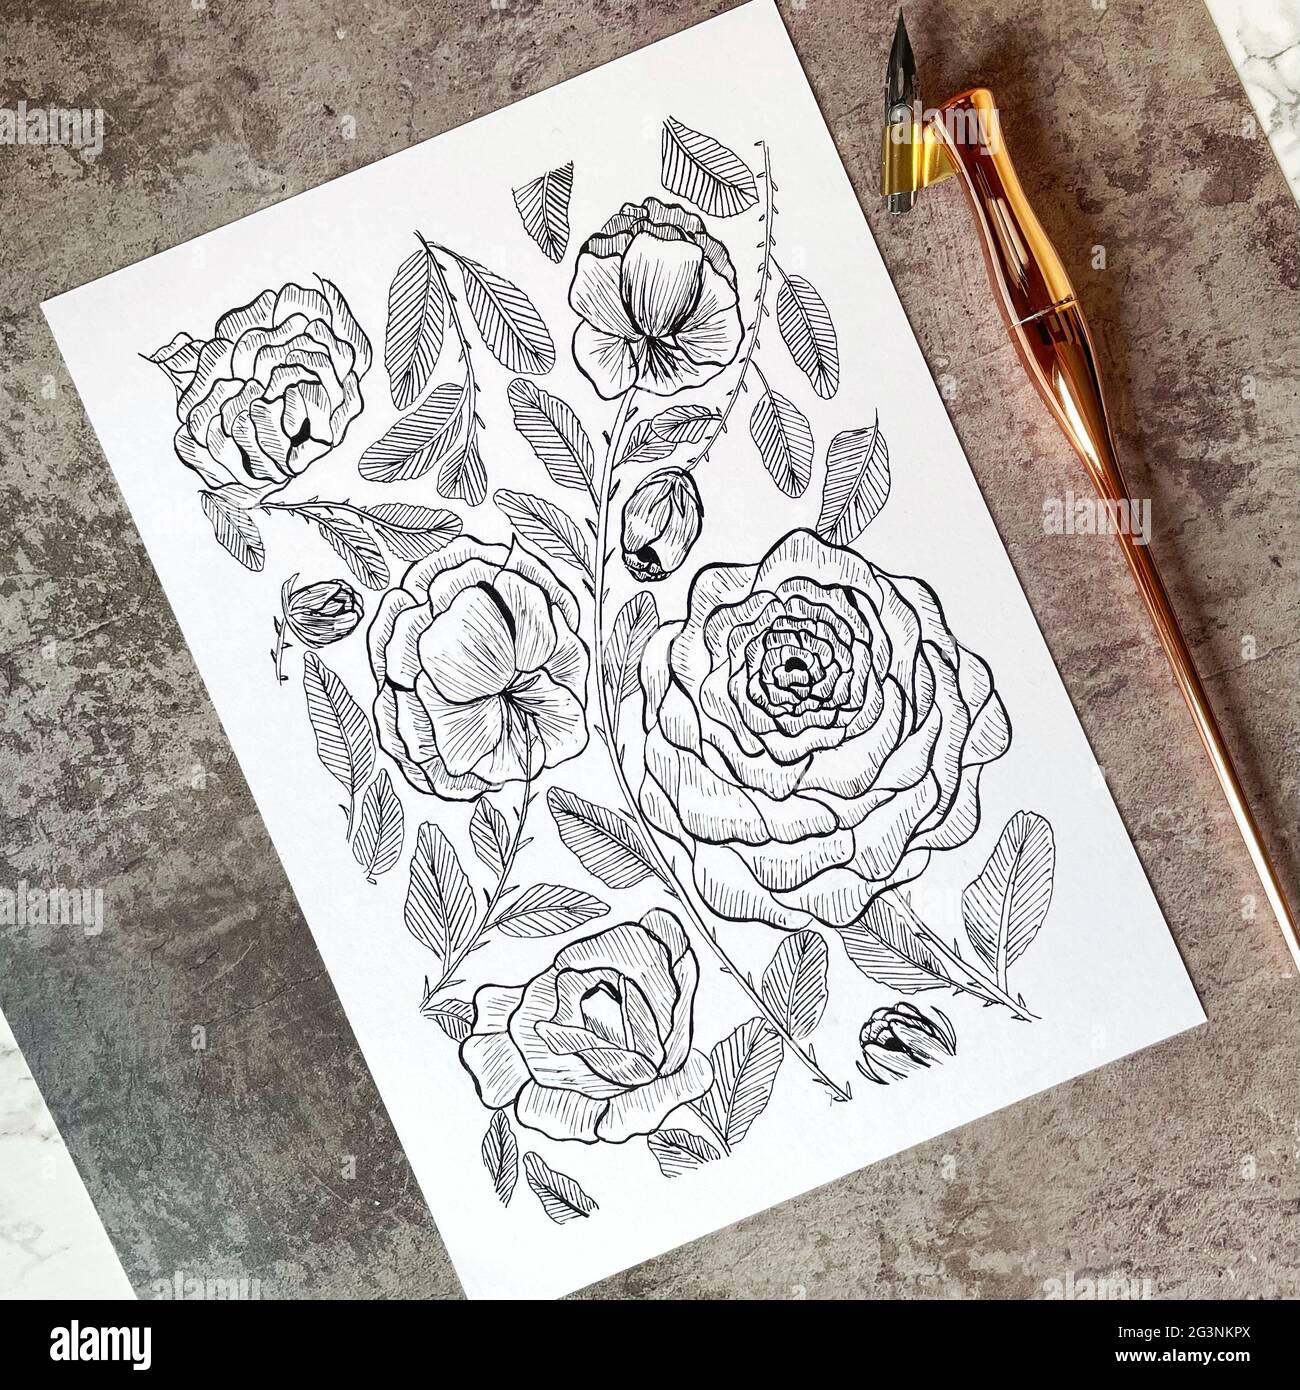 Handmade Card with Vintage Roses Made with ink and pointed pen Stock Photo